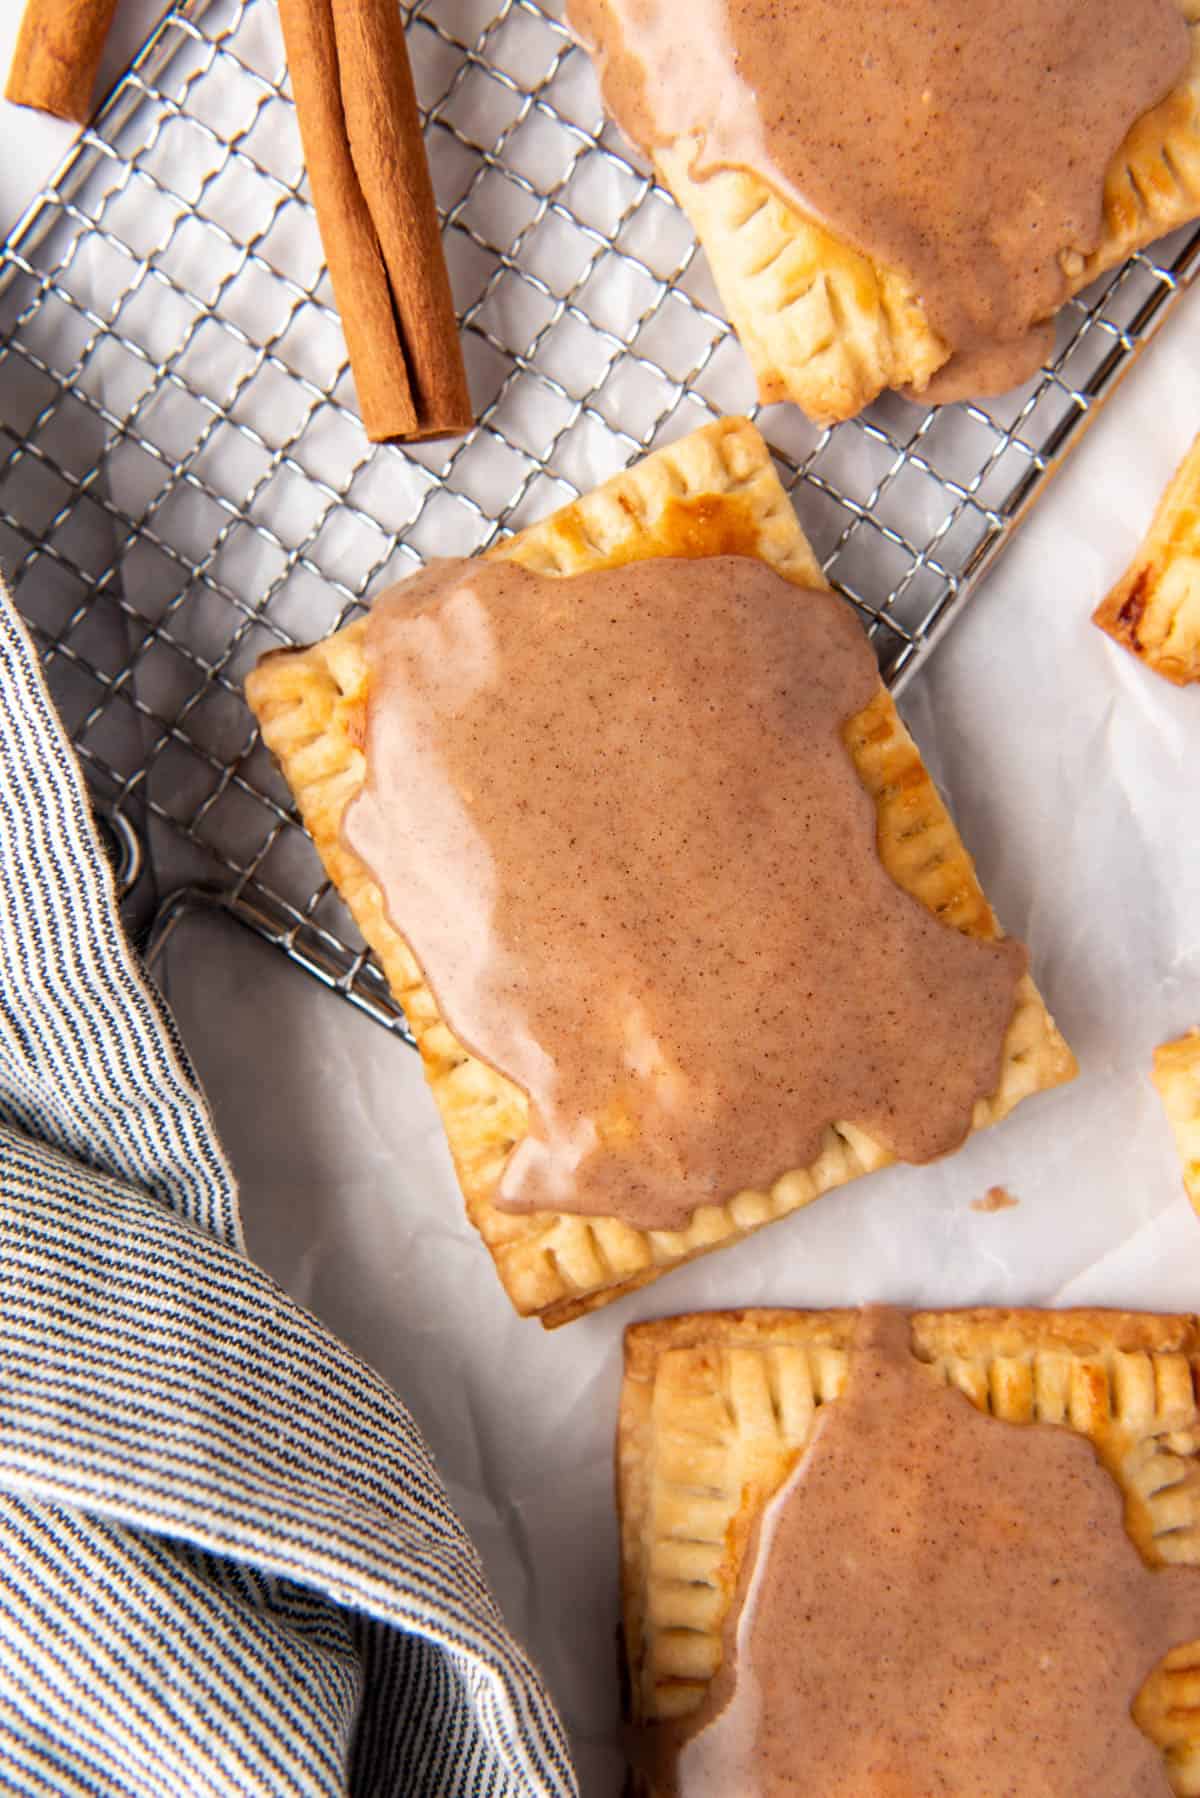 An overhead image of a brown sugar cinnamon pop tart on a wire rack with cinnamon sticks and a linen napkin nearby.